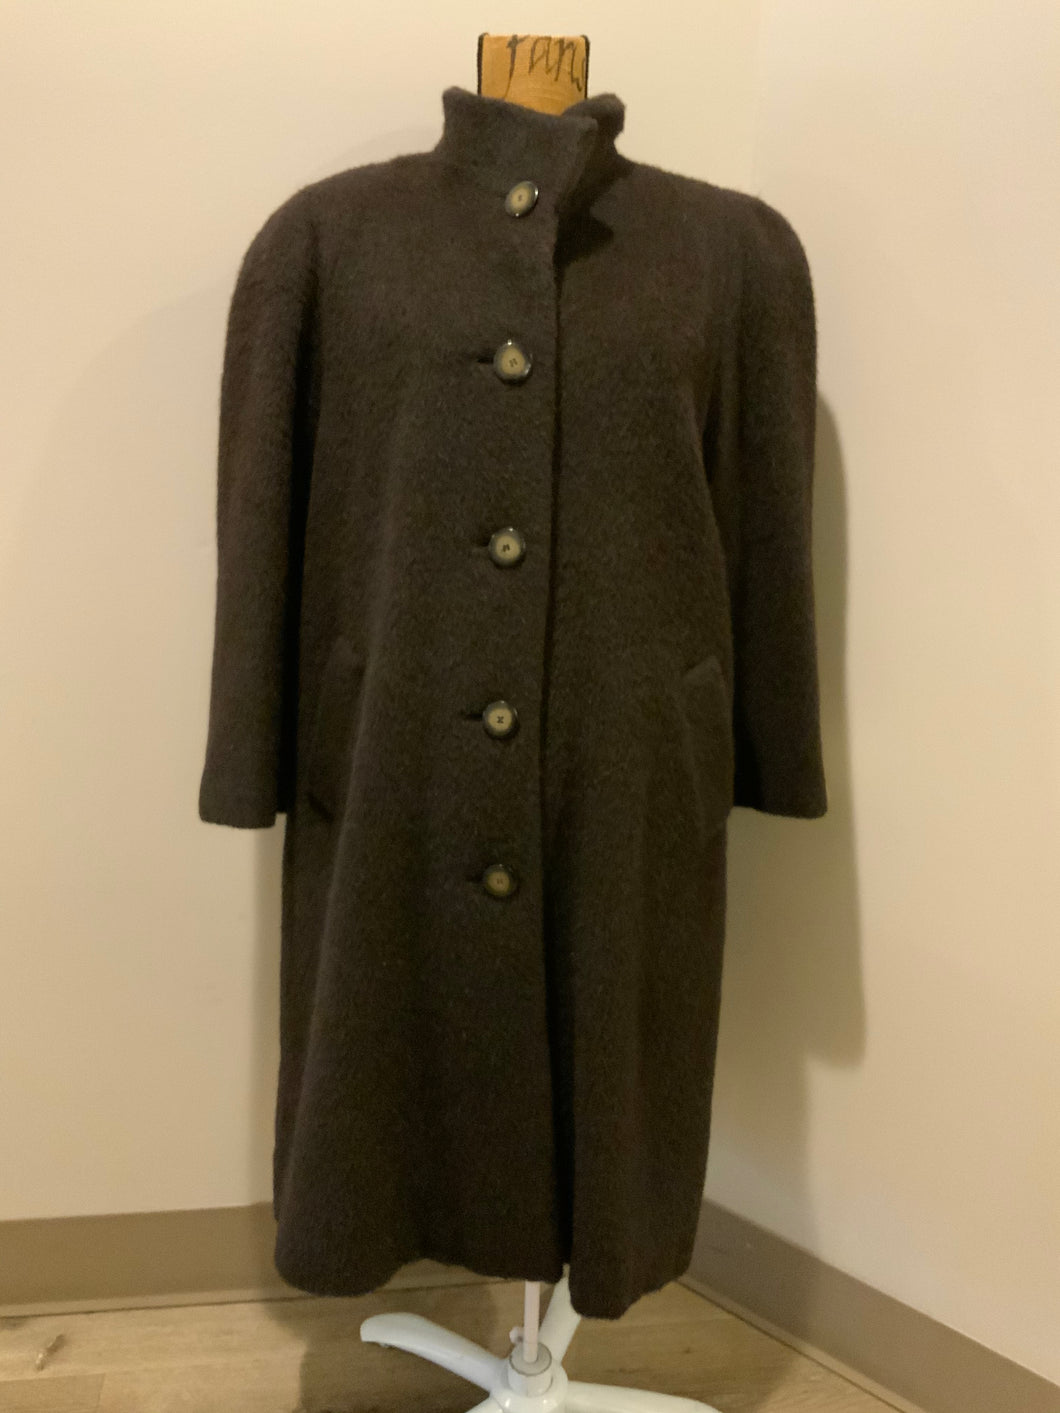 Kingspier Vintage - Regency 1970’s dark brown alpaca wool full length coat with front pockets and buttons, shoulder pads and pleating detail in the back. Features an ILGWU, Made in the USA label on inner lining. Fits a Size 8.